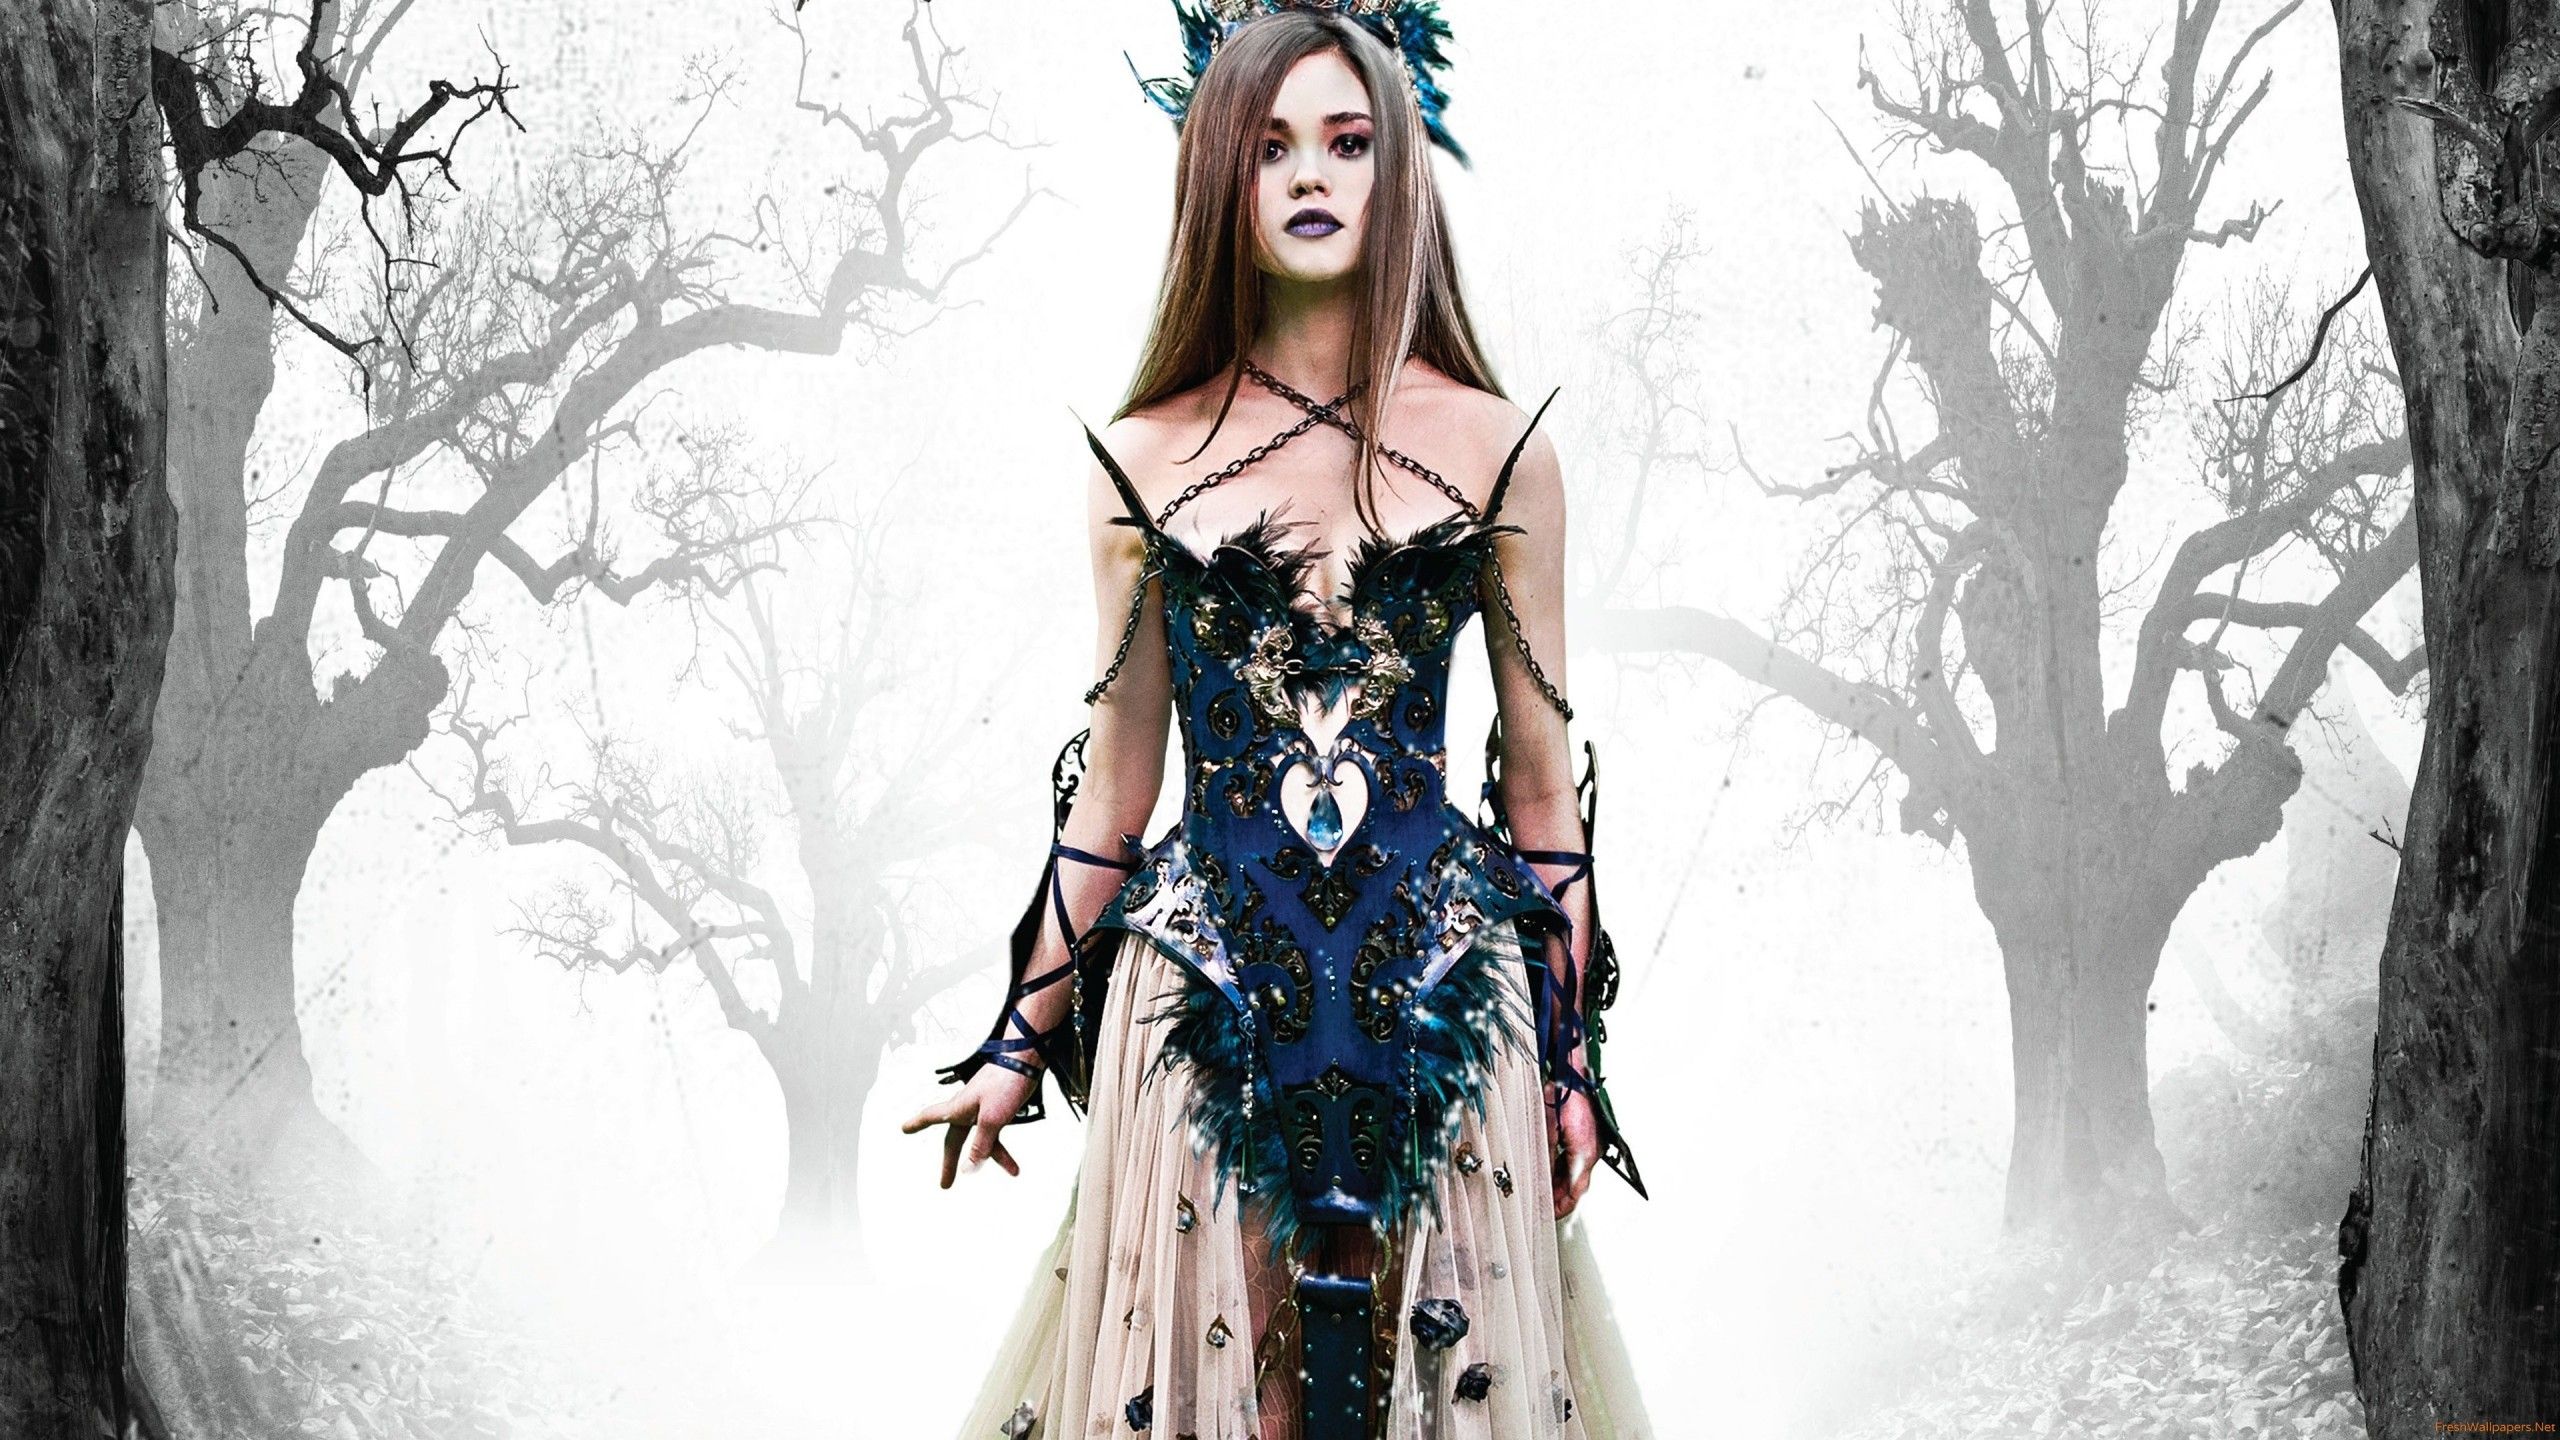 Wallpaper The Curse of Sleeping Beauty, India Eisley, best movies